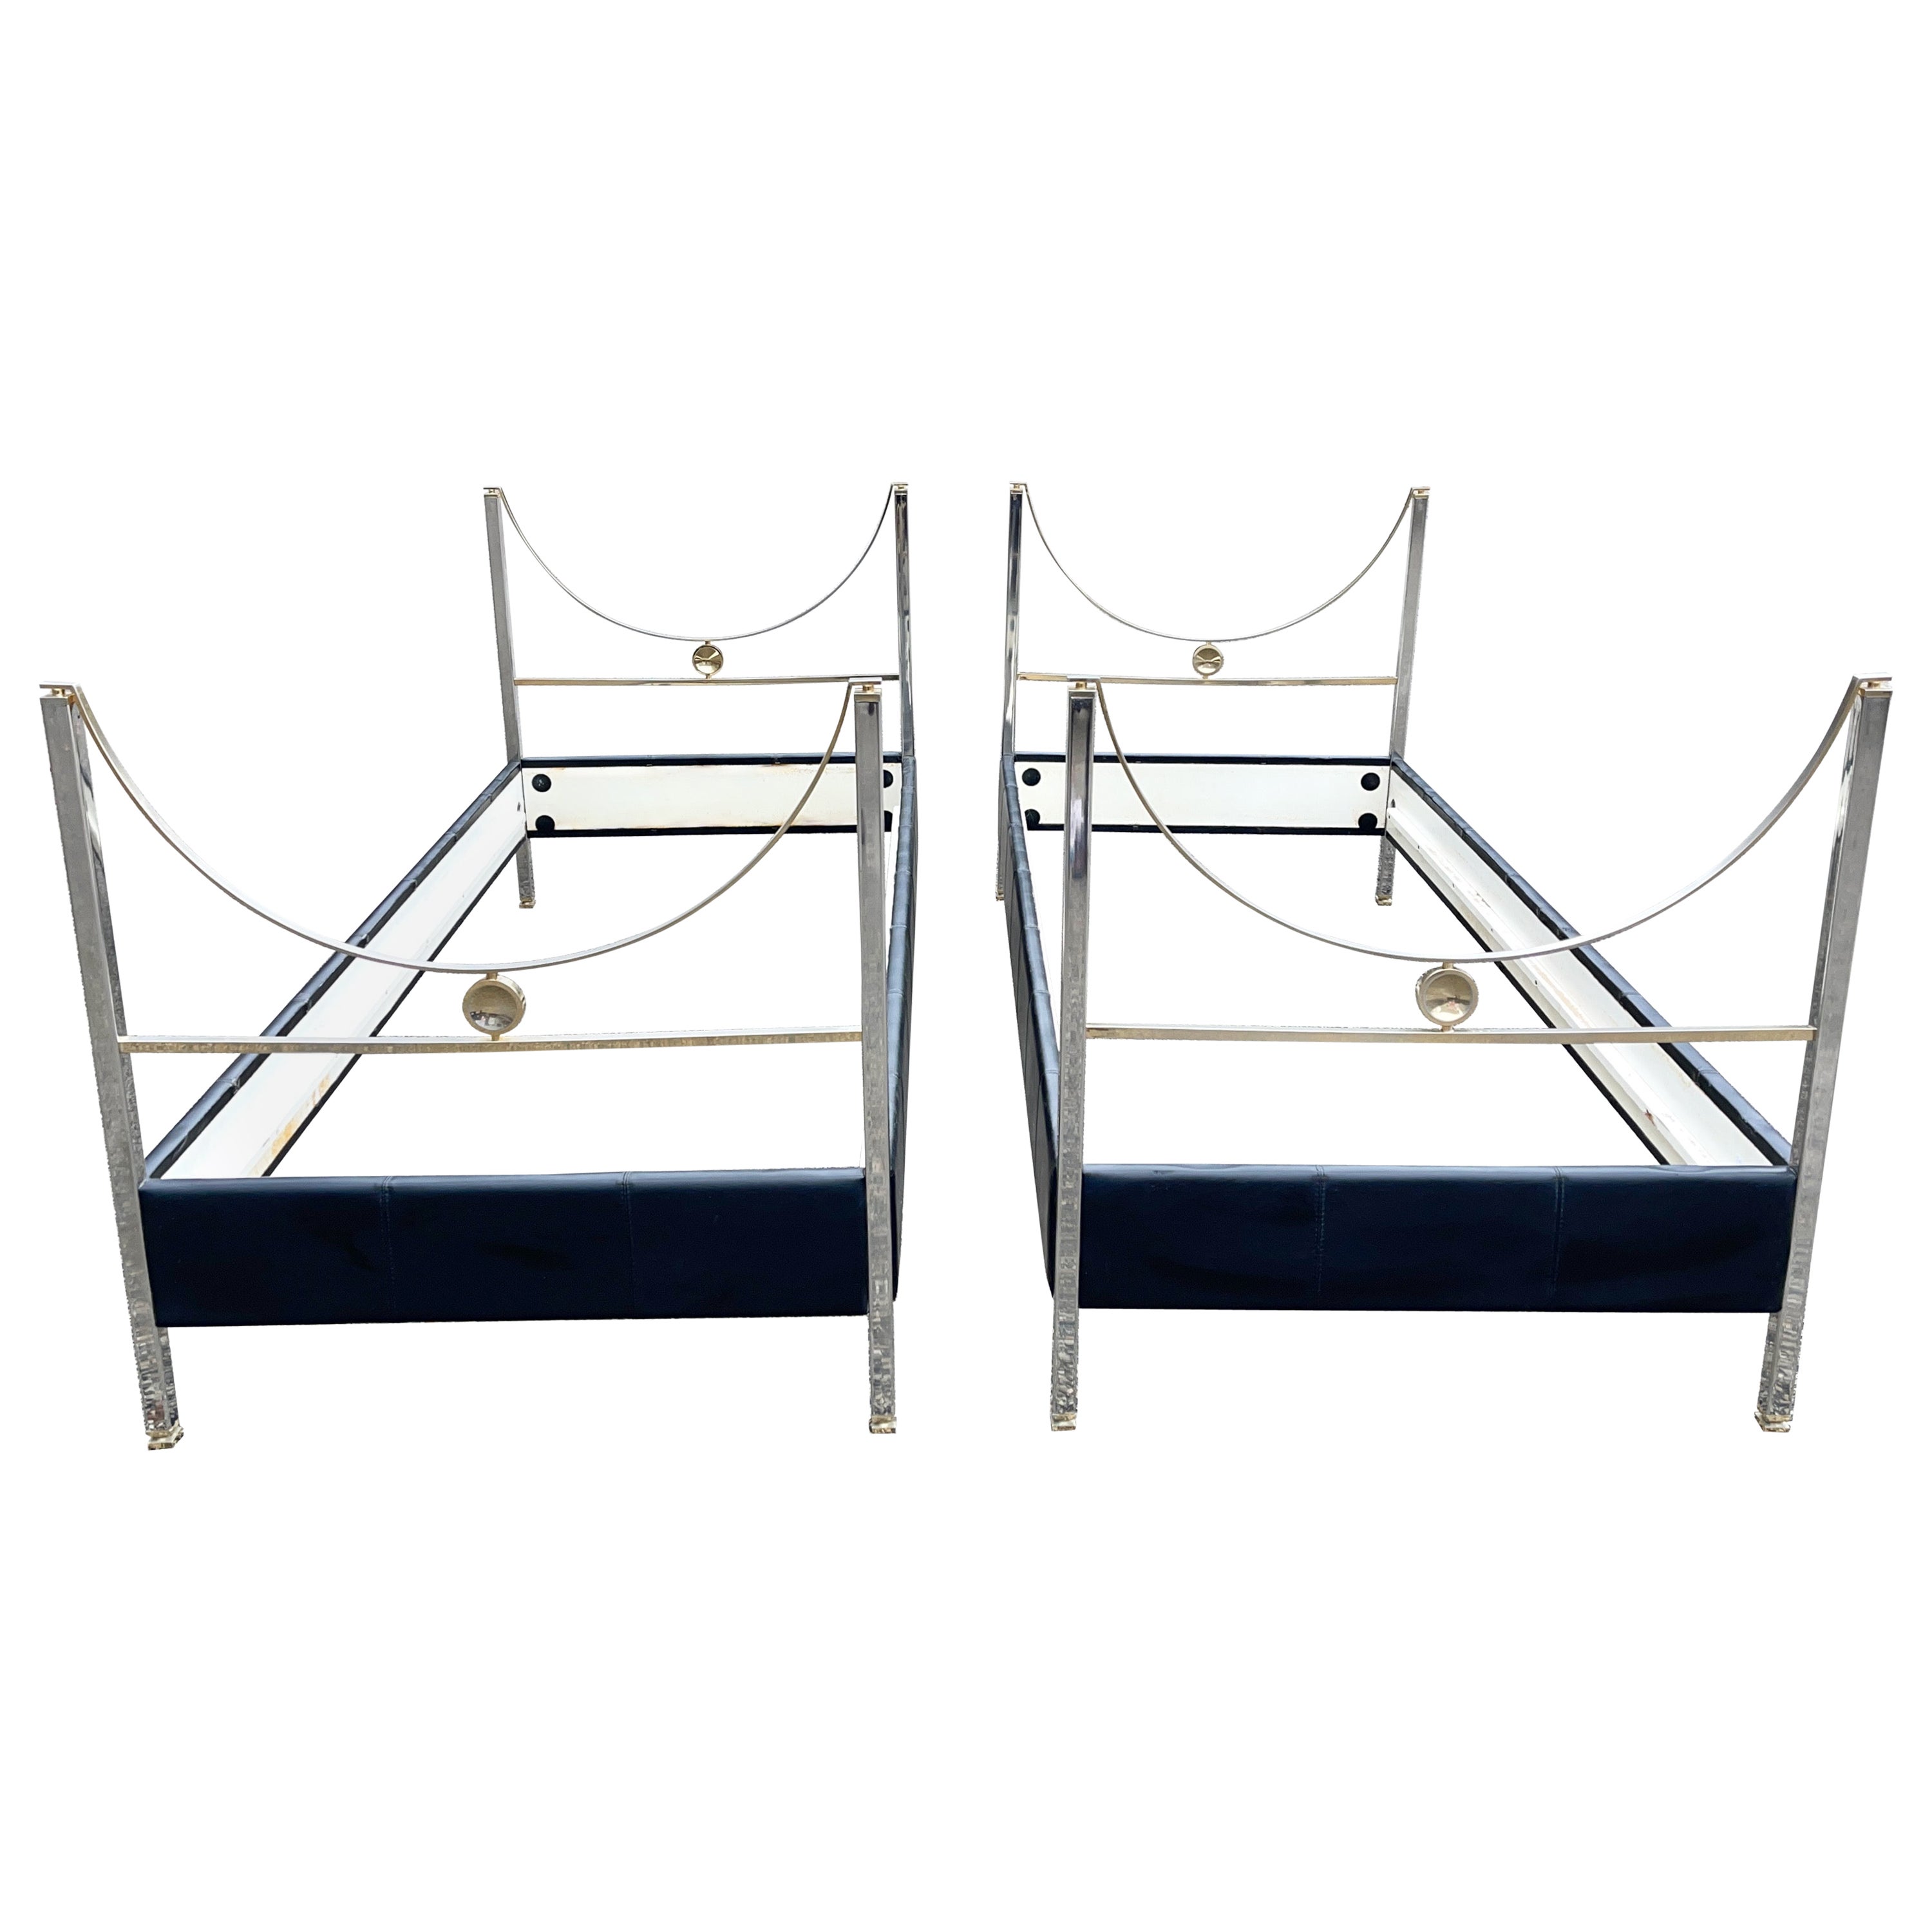 Pair of "D90" Beds by Carlo de Carli for Sormani